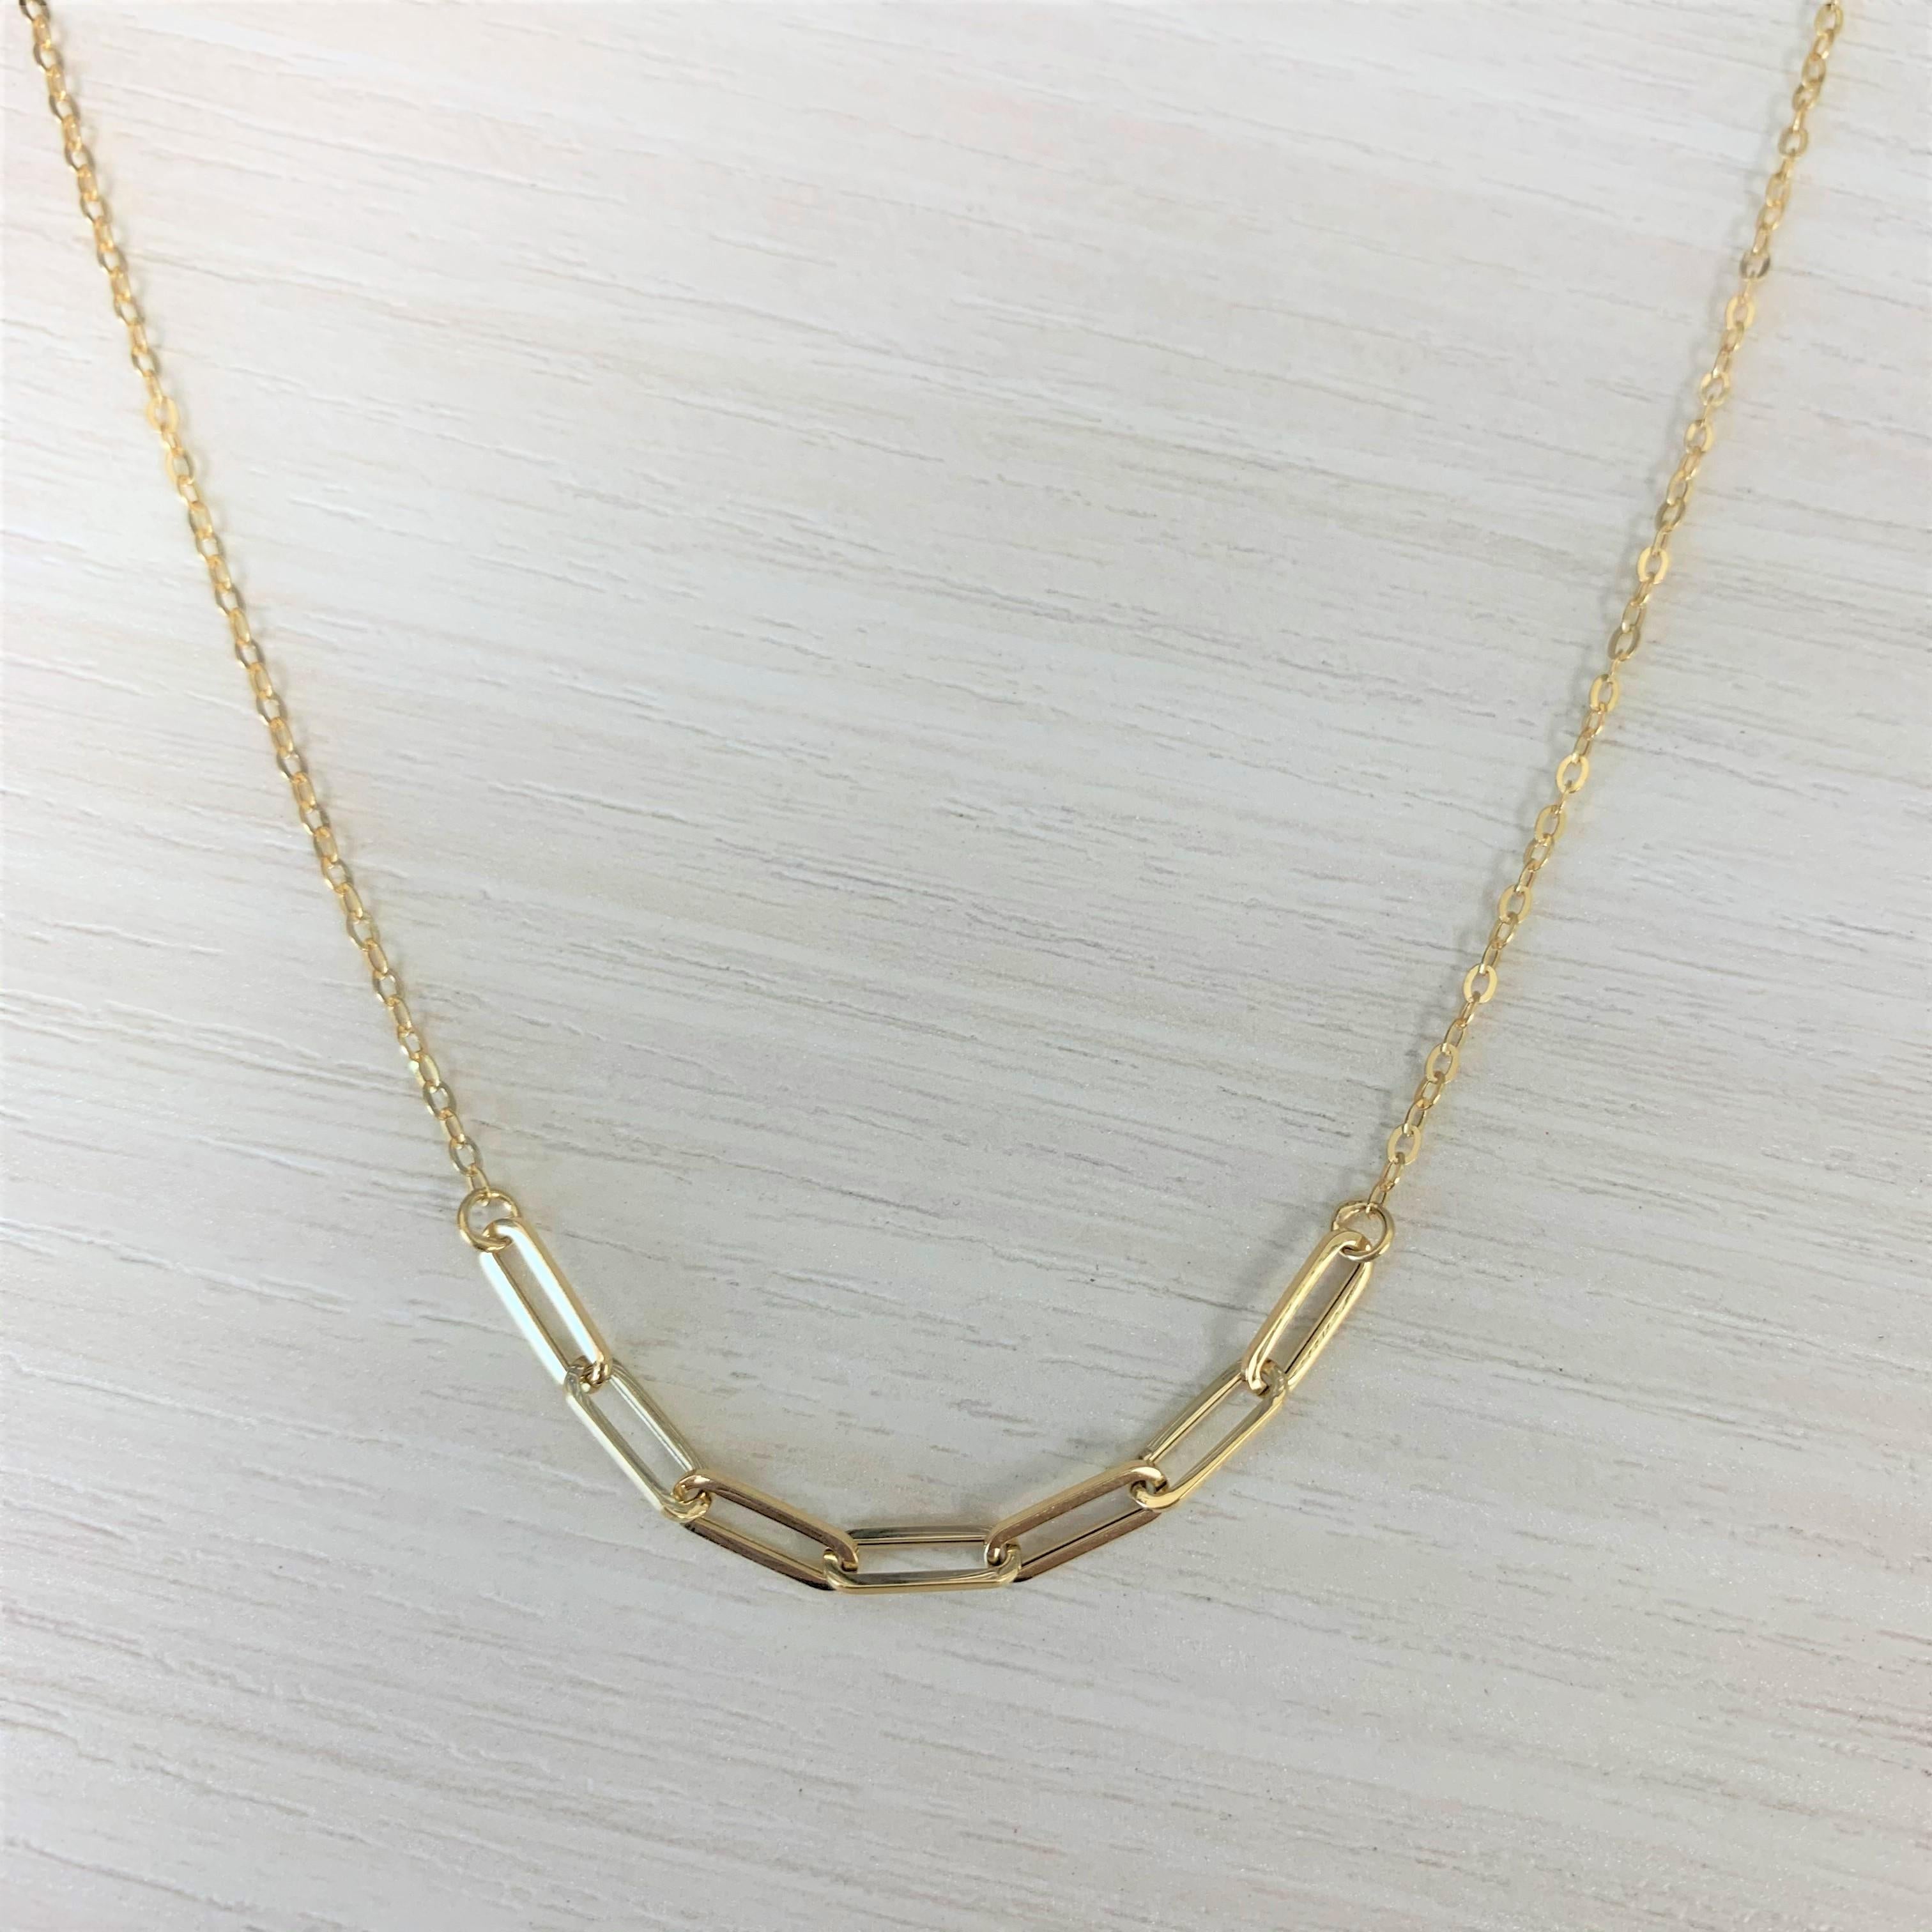 Contemporary 14 Karat Yellow Gold 1.40 Grams Paperclip Link Chain Necklace